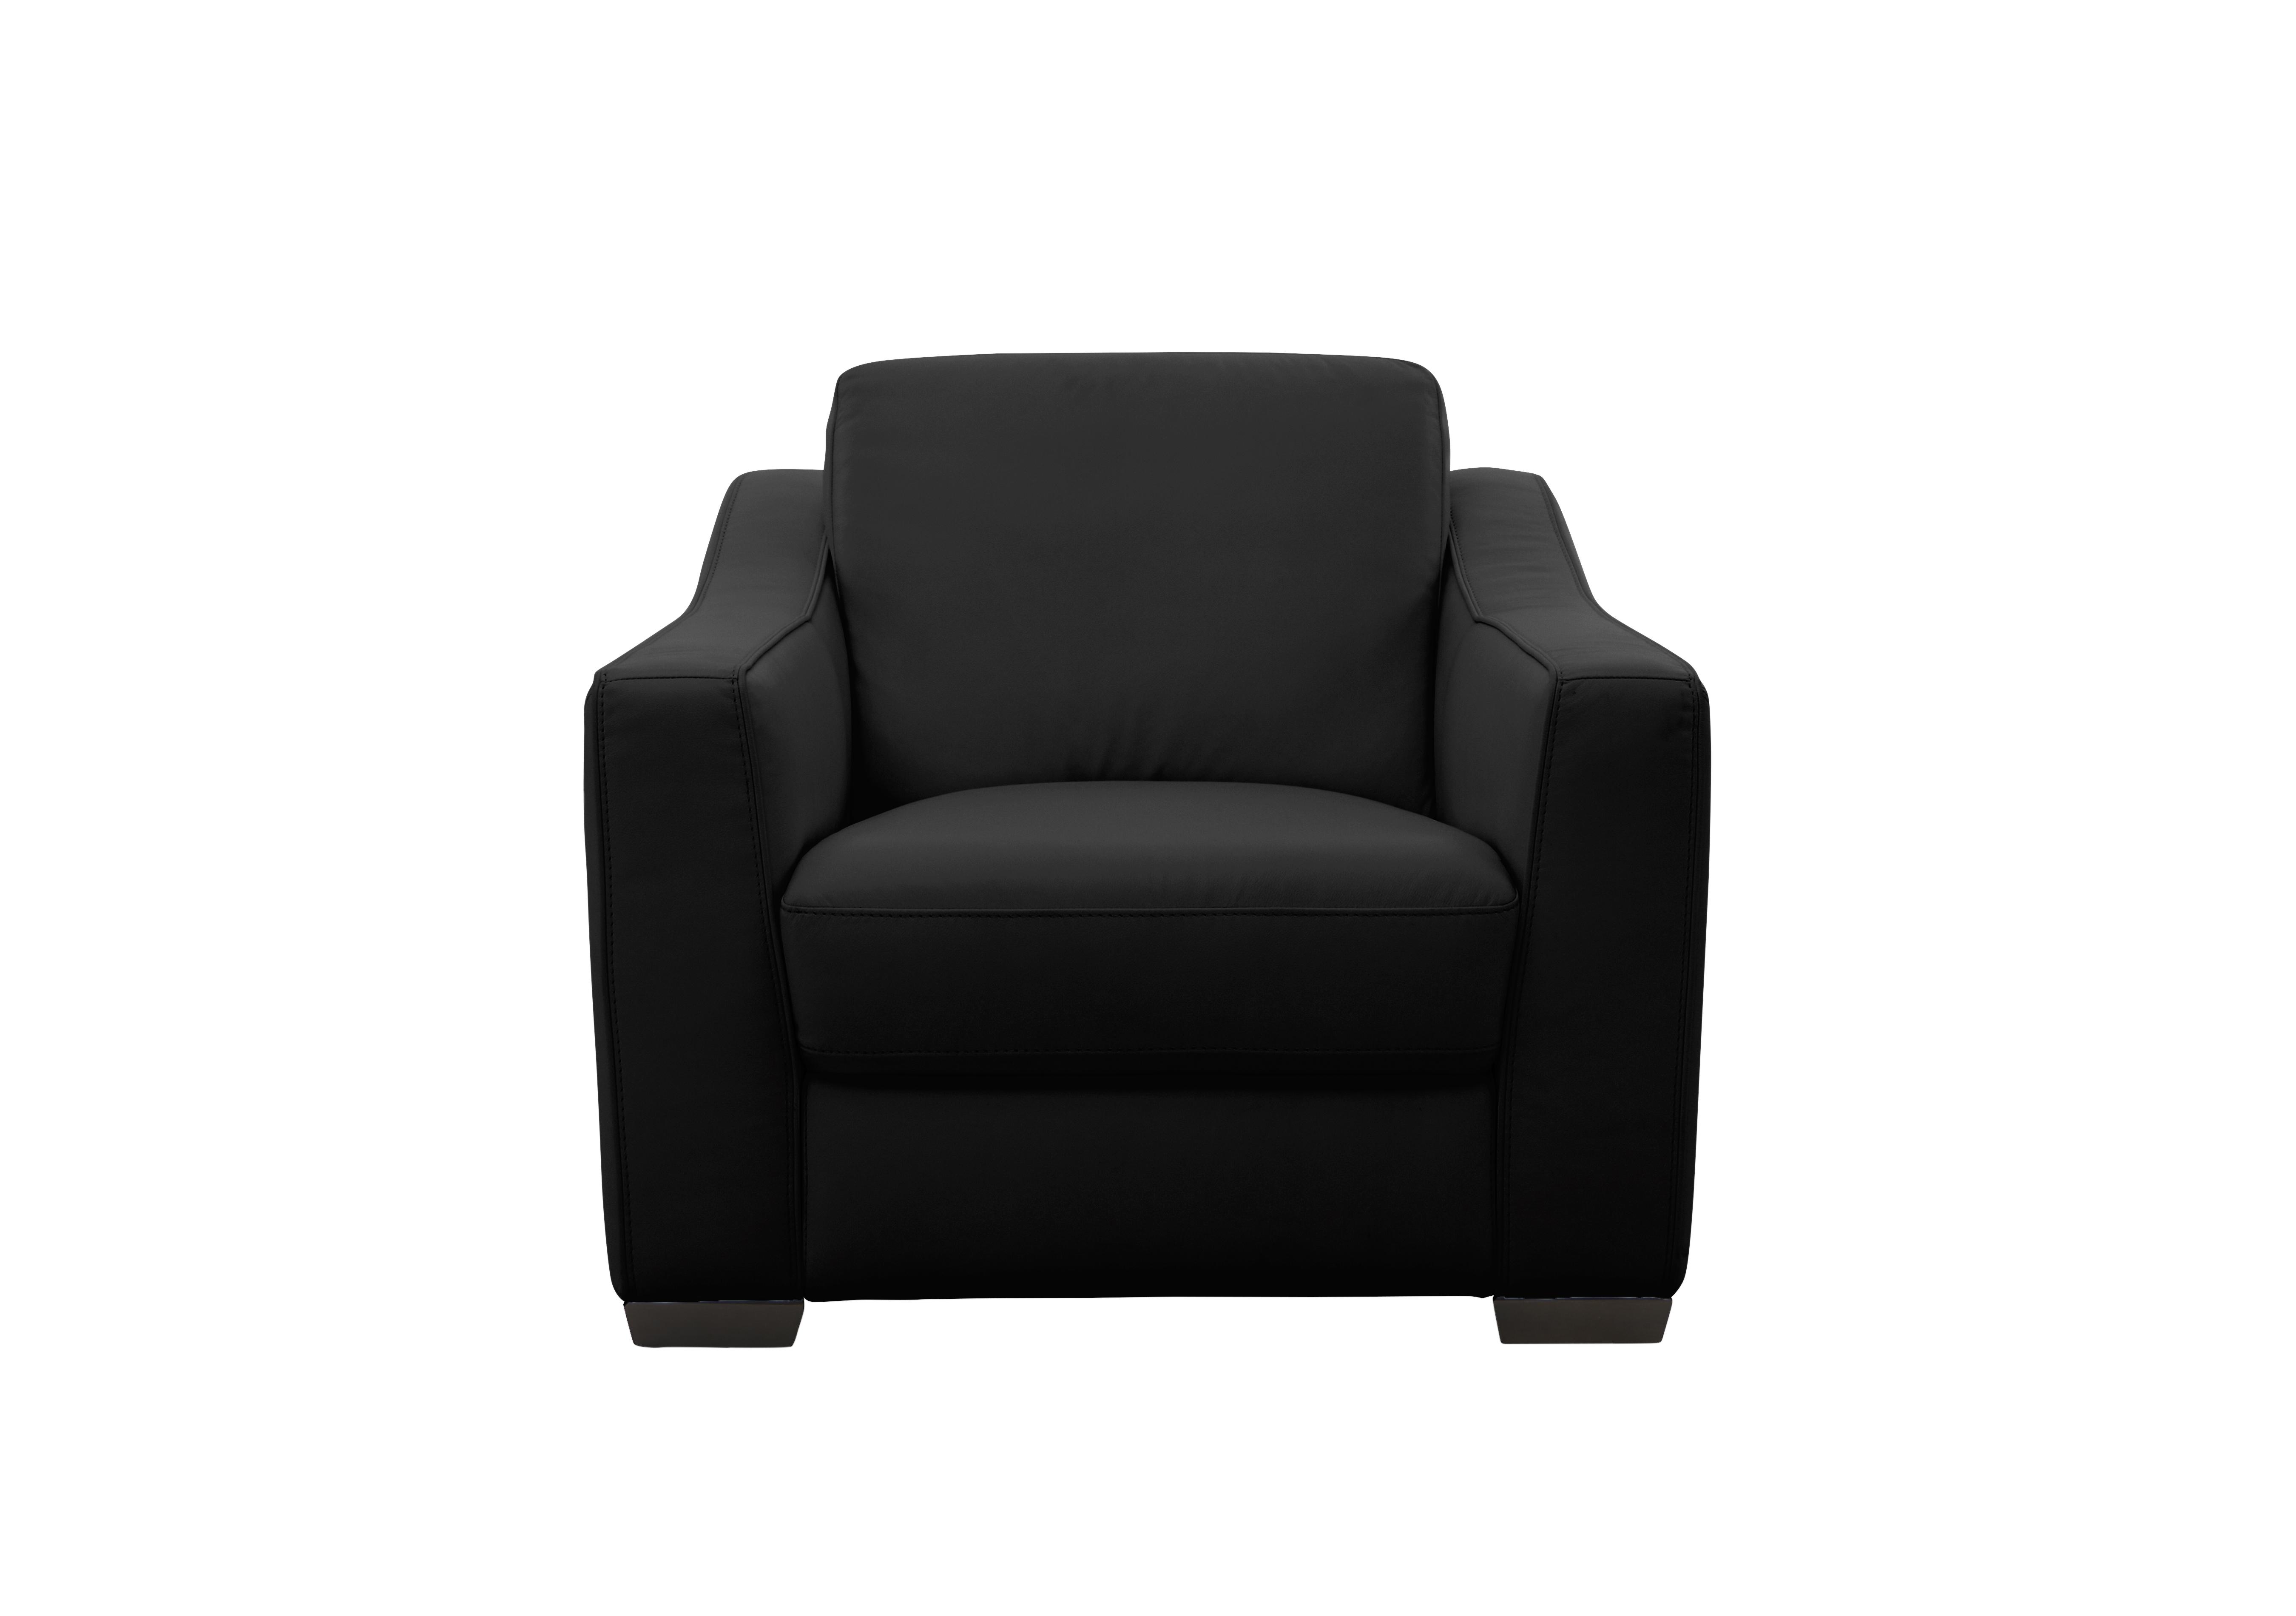 Optimus Leather Armchair in Bv-3500 Classic Black on Furniture Village